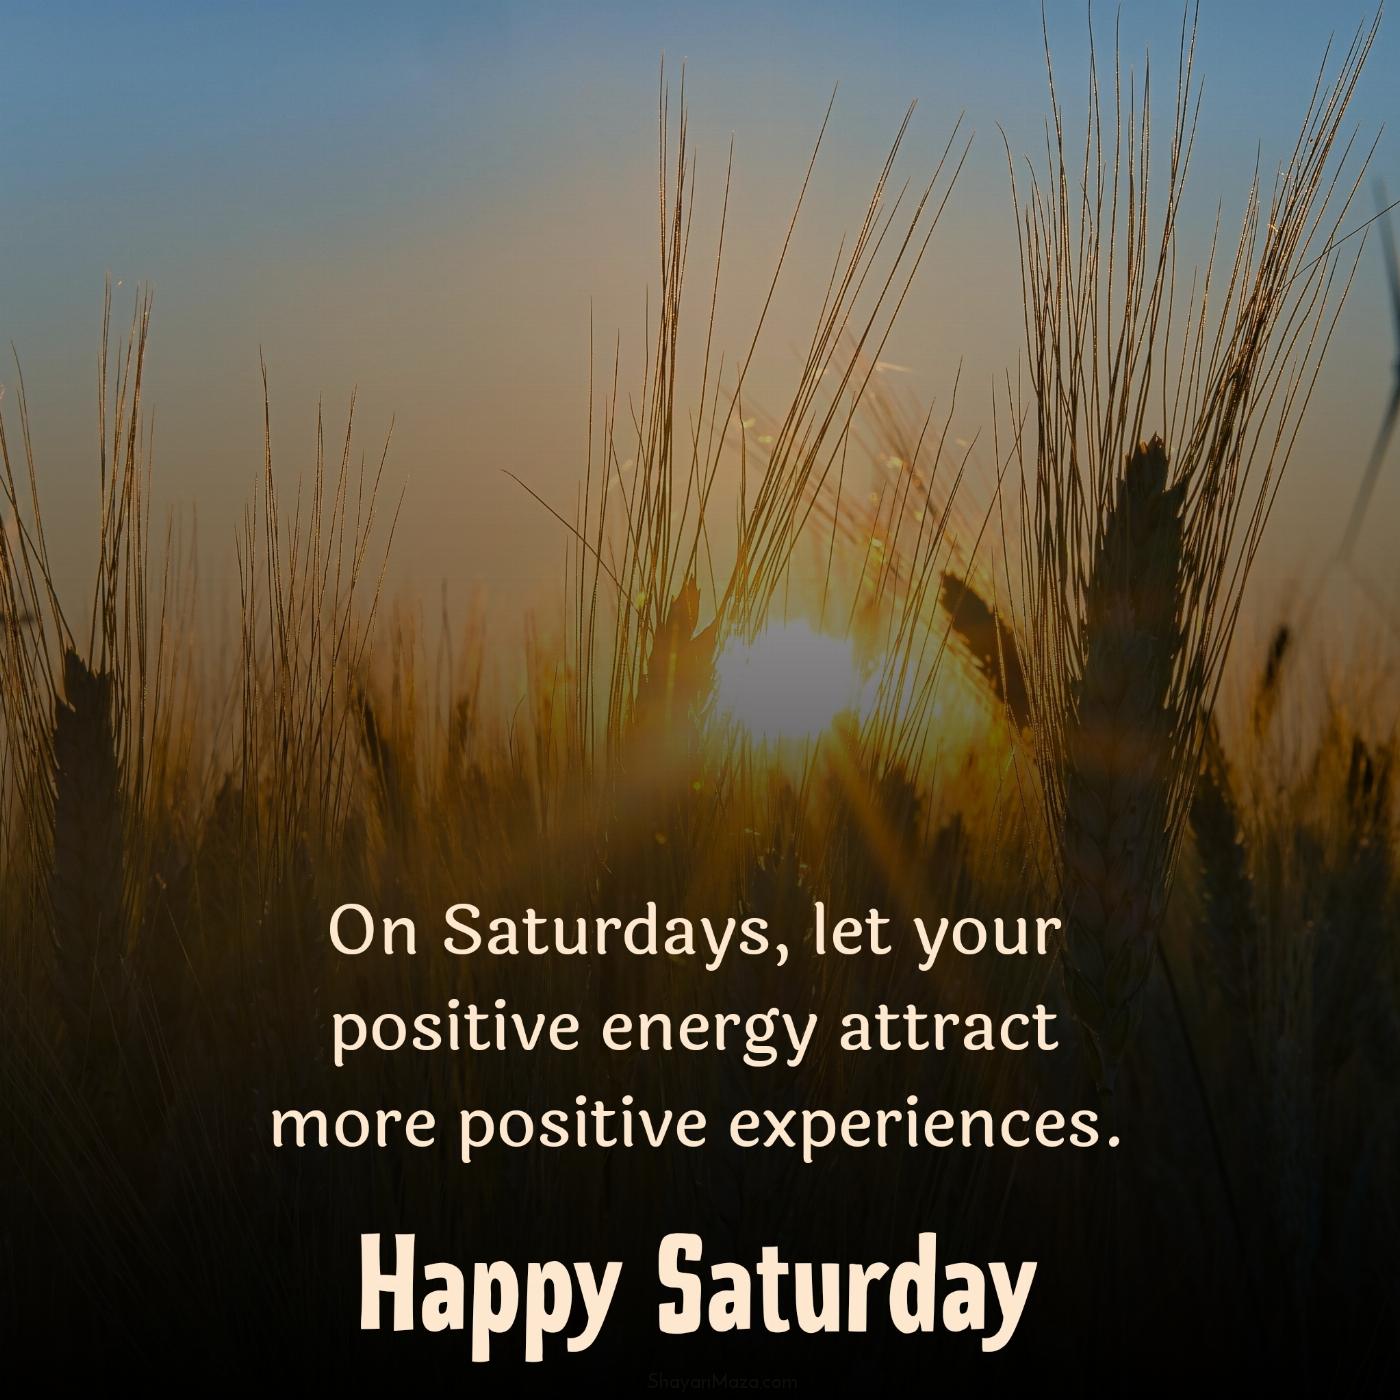 On Saturdays let your positive energy attract more positive experiences